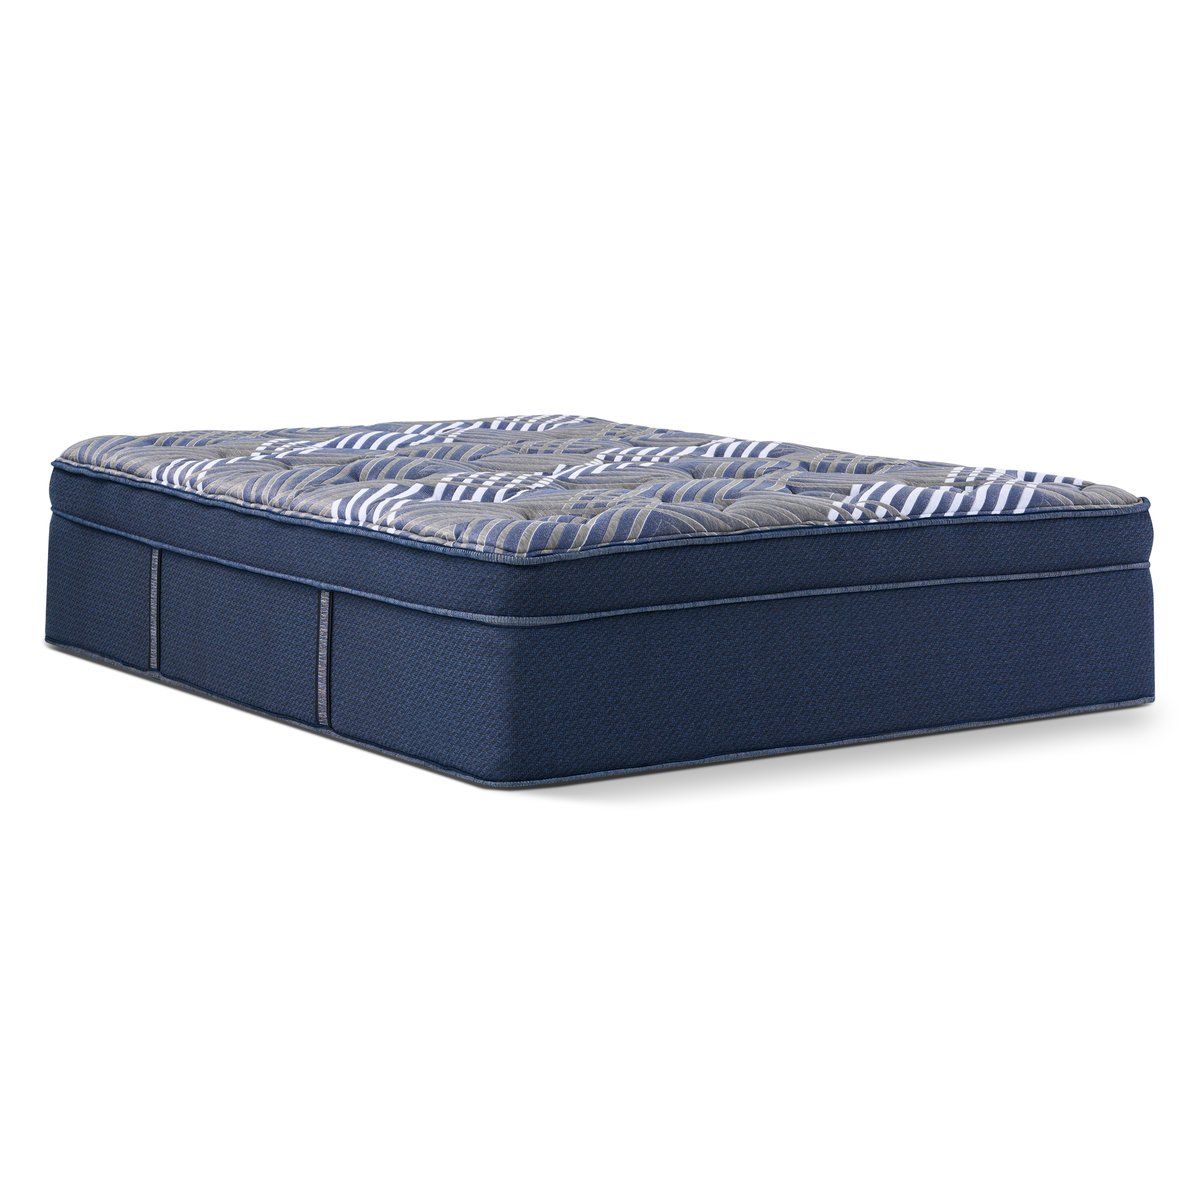 Elite EuroTop Quilted Full Mattress